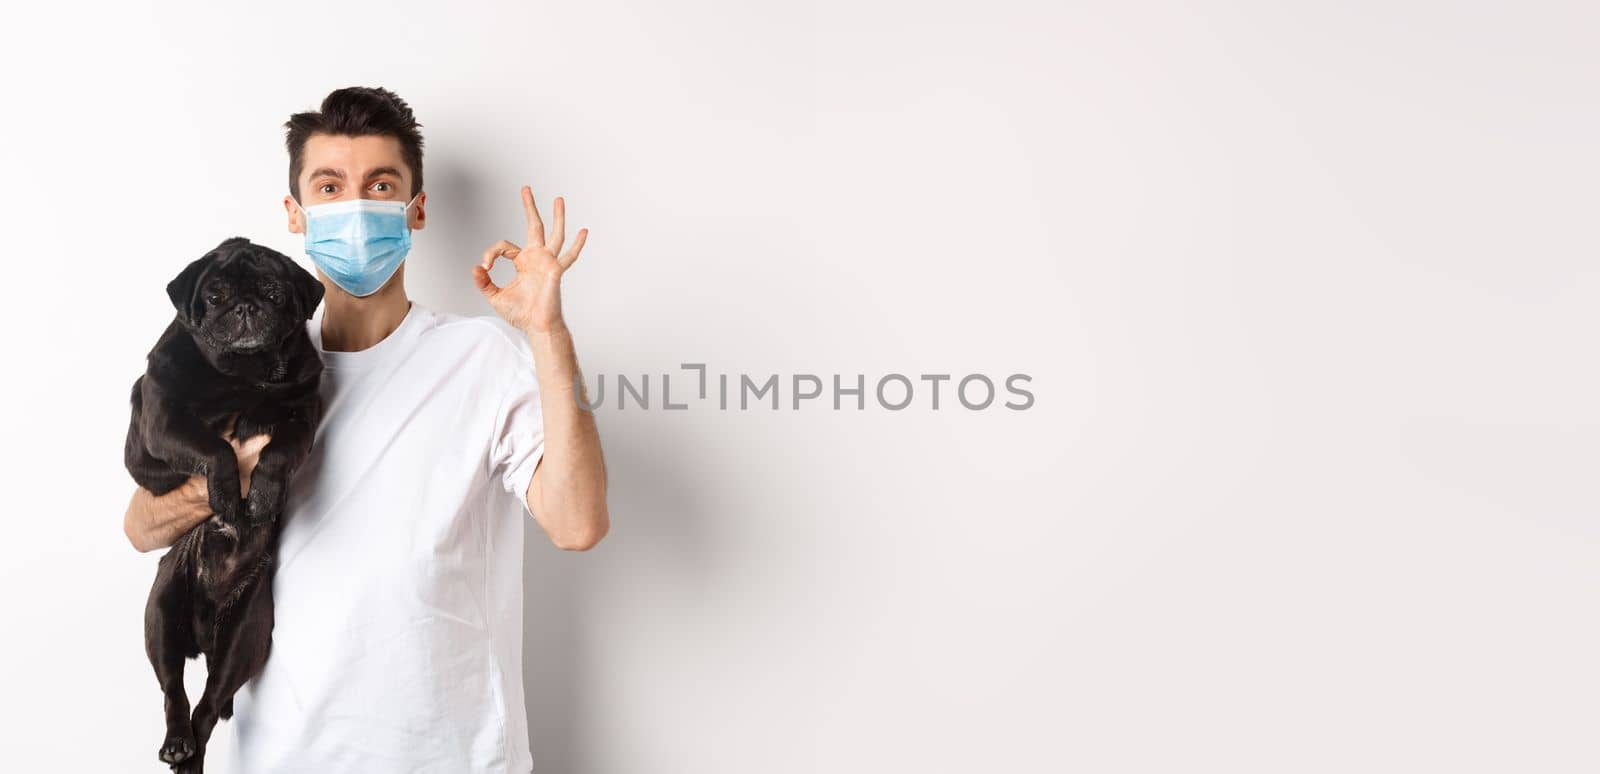 Covid-19, animals and quarantine concept. Young man in medical mask holding cute black pug dog, showing okay sign, like and approve, standing over white background.